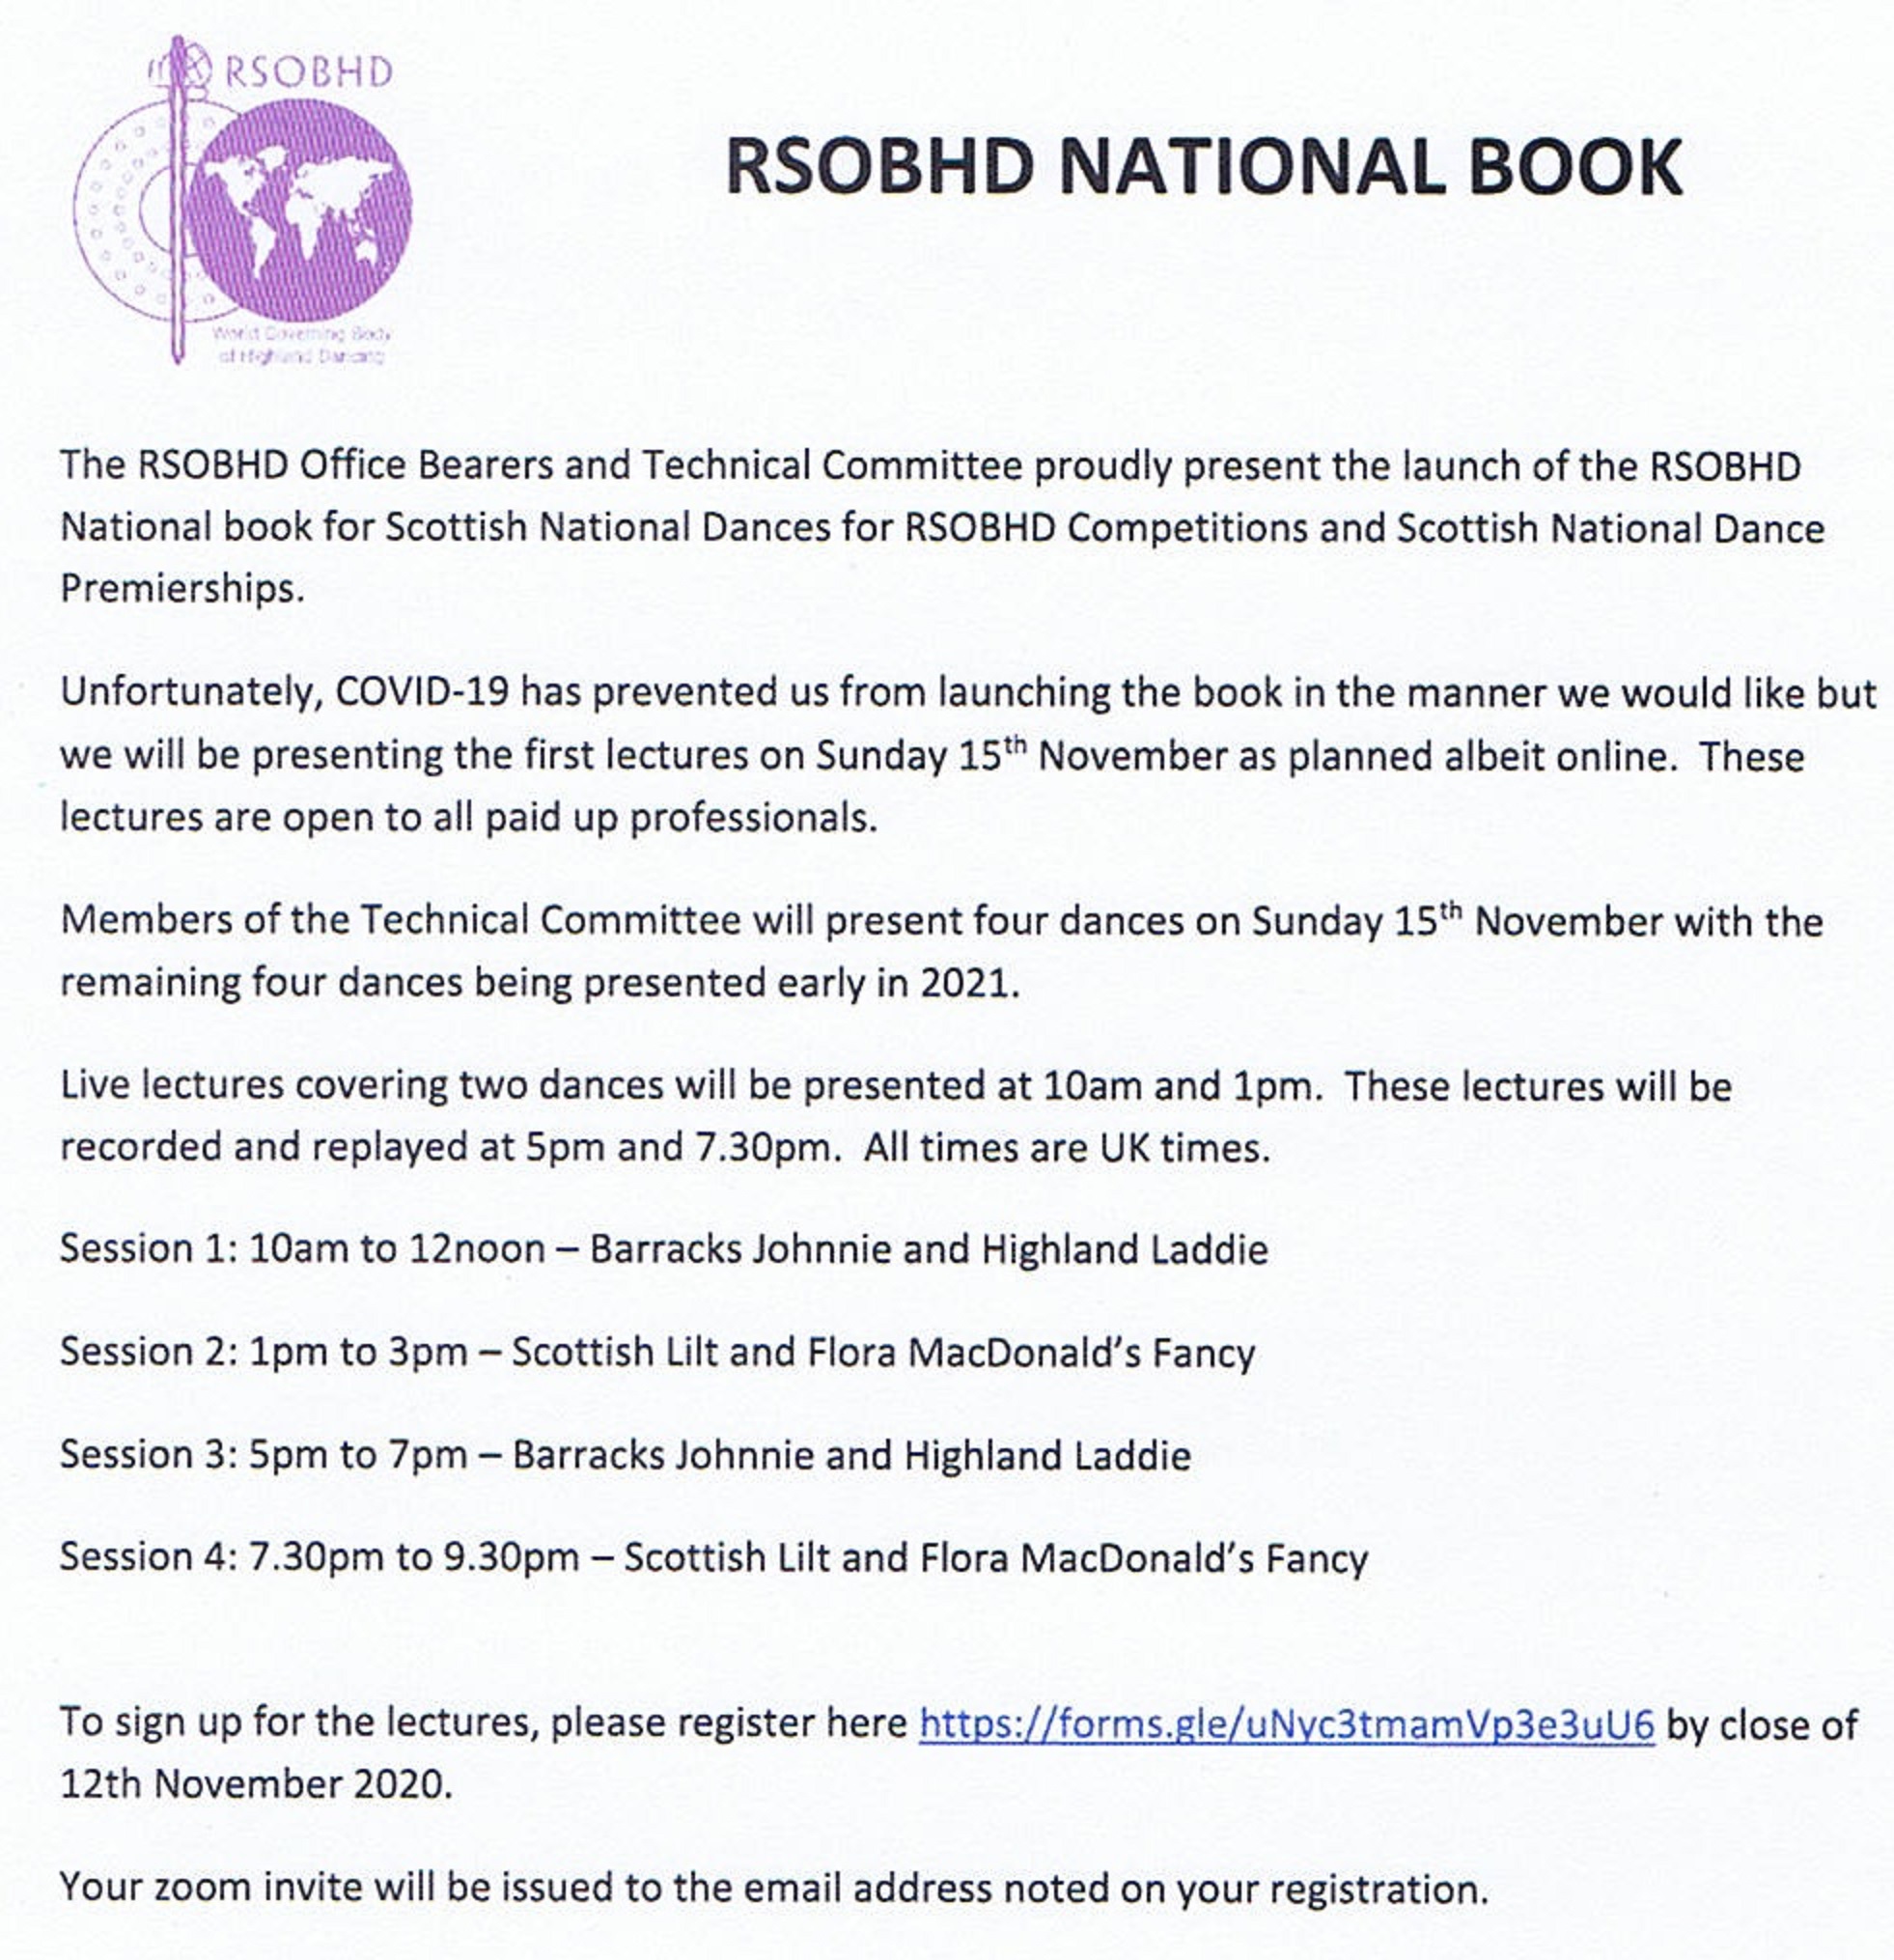 RSOBHD New National Book Lecture